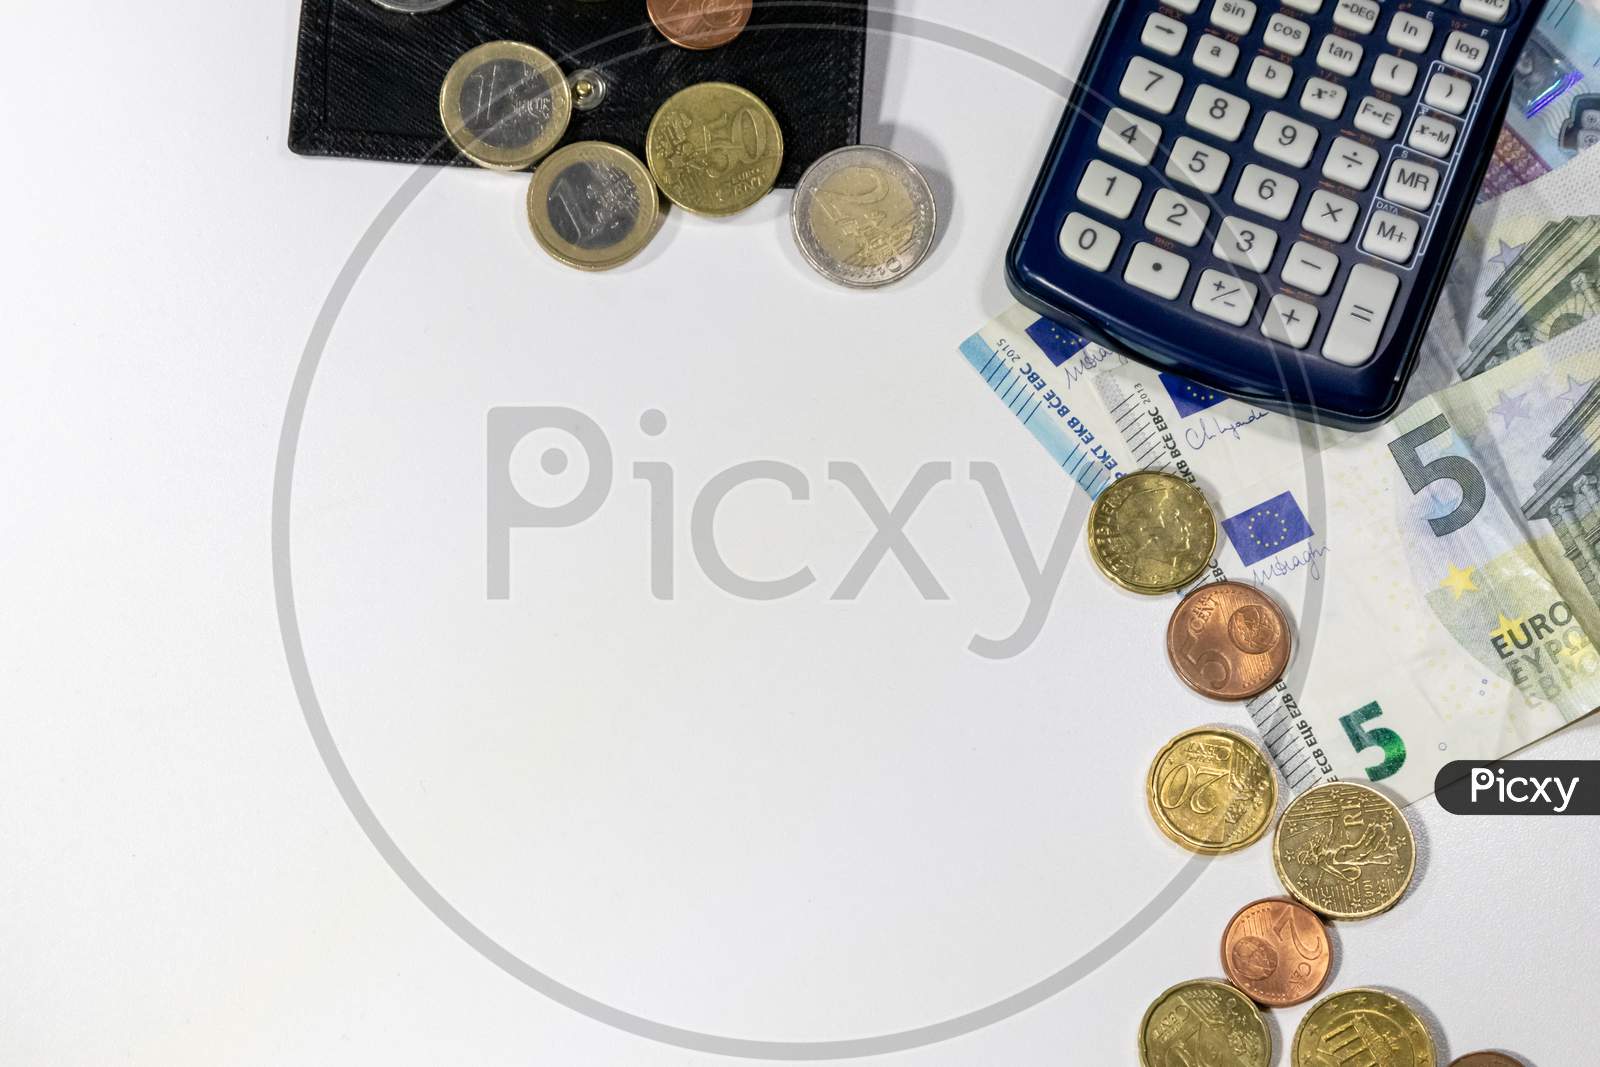 European money with black wallet on white desk as white background with different euro coins and euro bank notes with calculator for financial management and income business plans for tax calculation